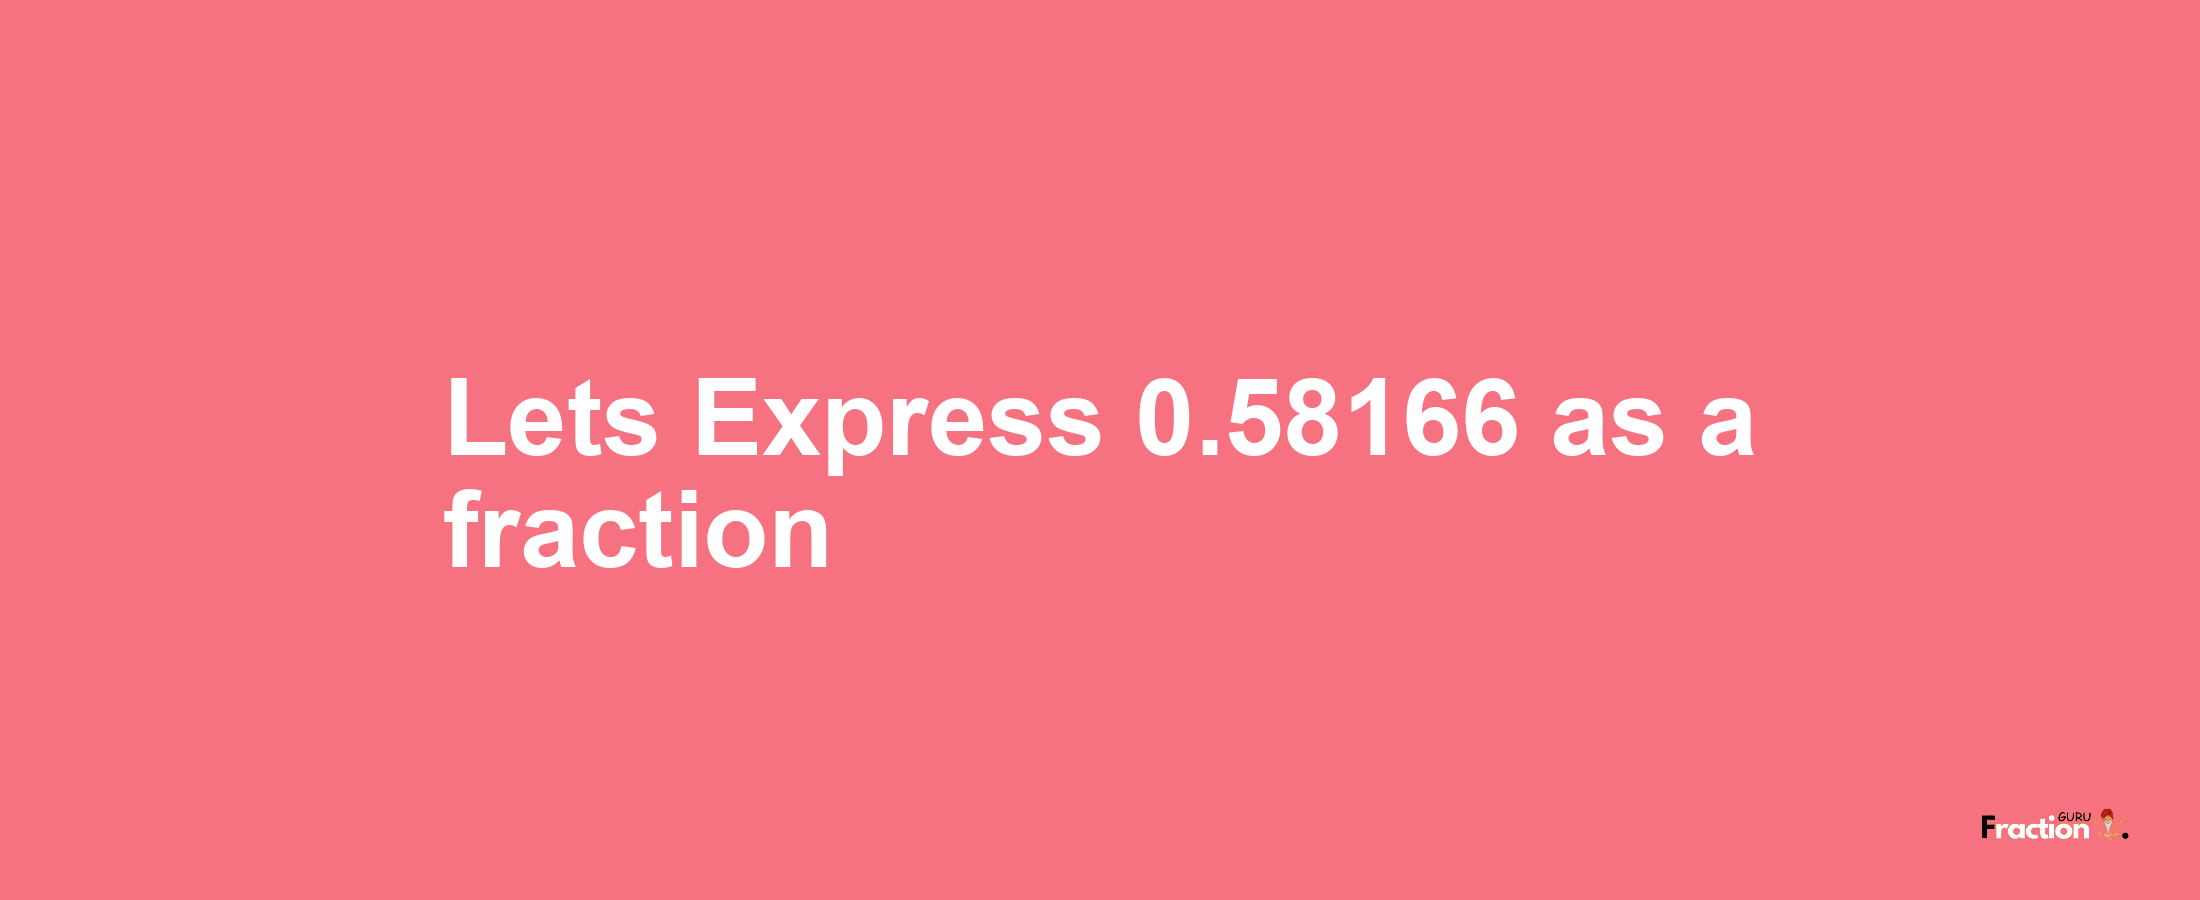 Lets Express 0.58166 as afraction